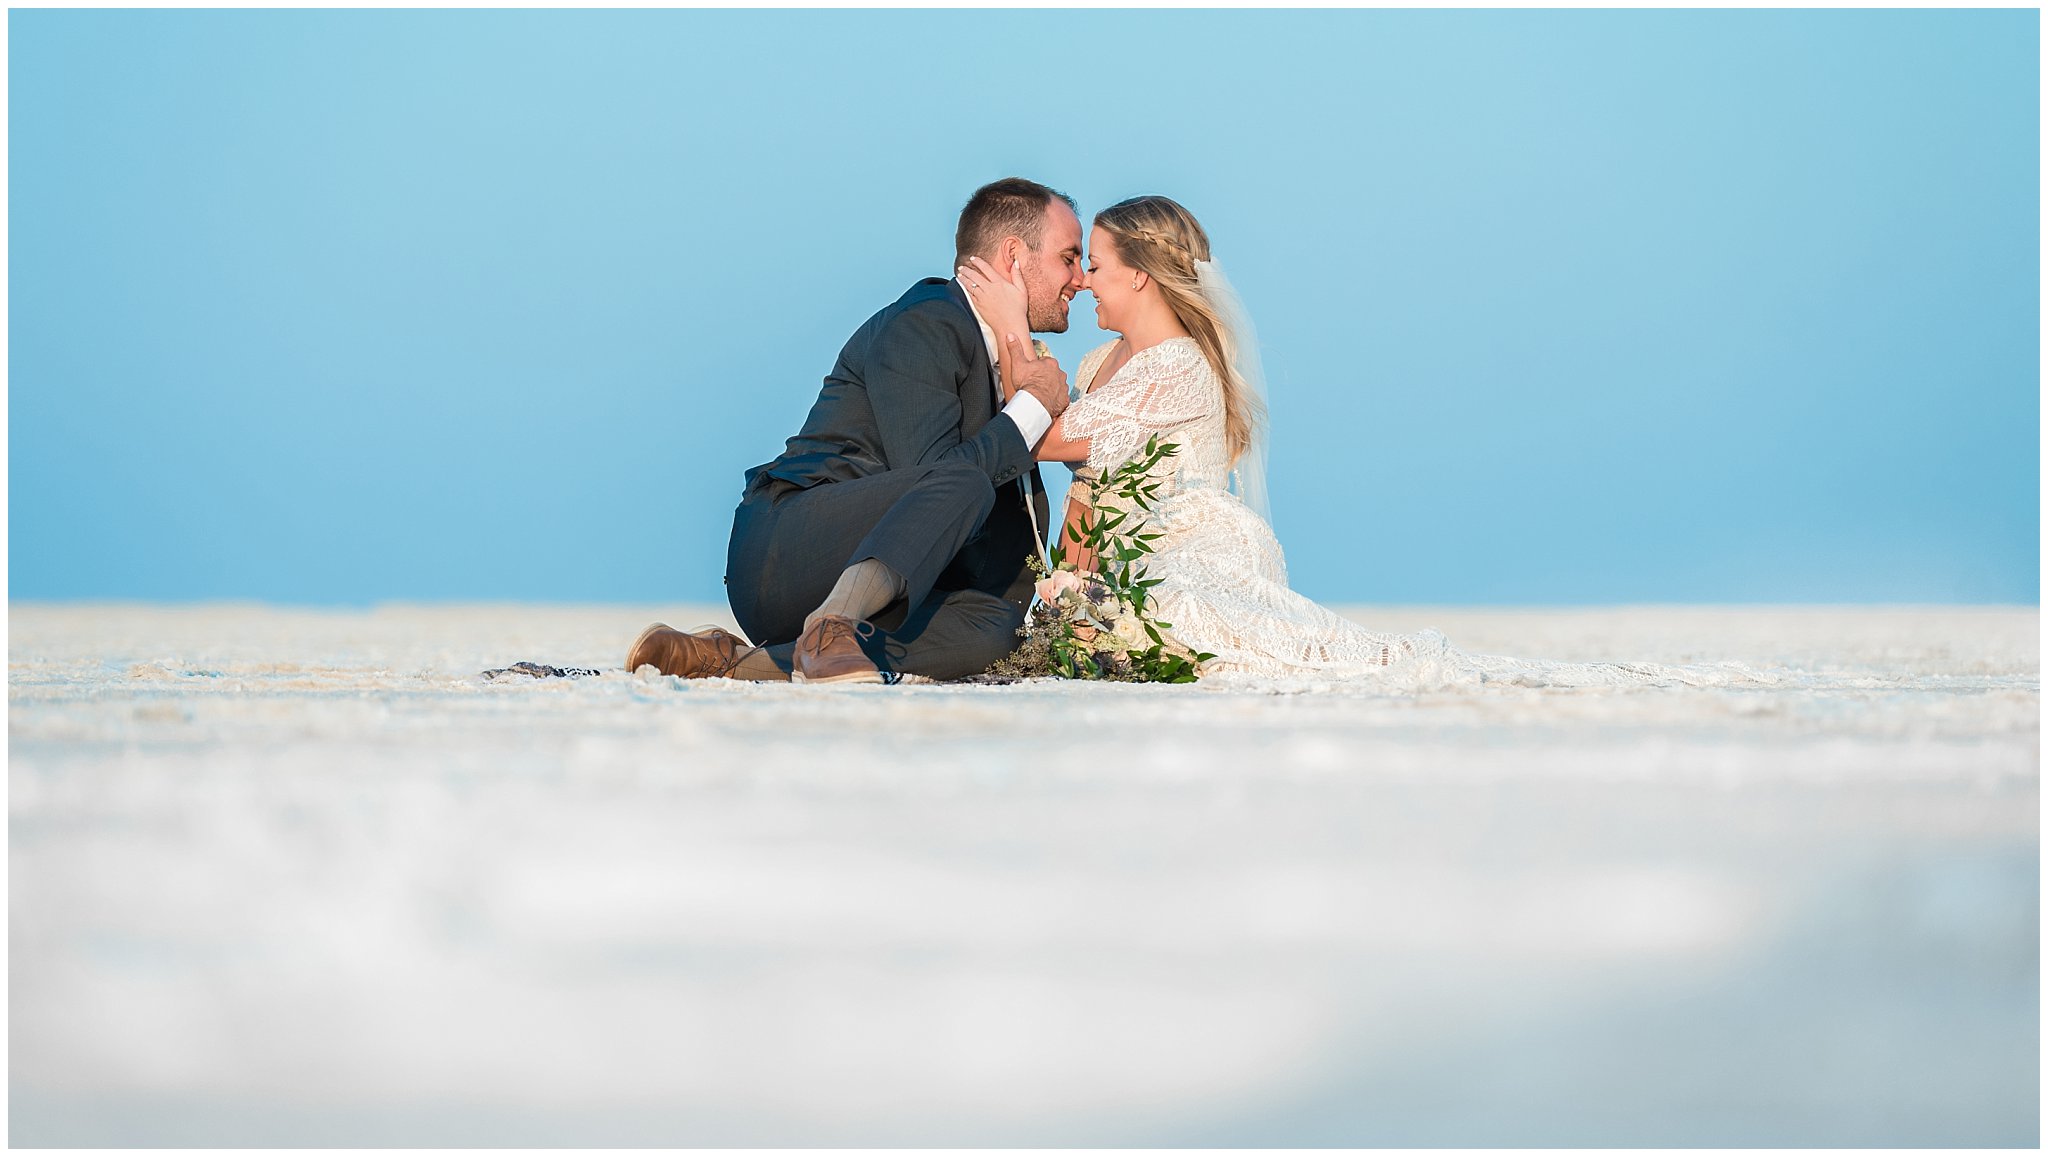 Bride and Groom in lace detail dress and blue suit for Adventure Session | Bonneville Salt Flats Sunset Wedding Formal Session | Jessie and Dallin Photography